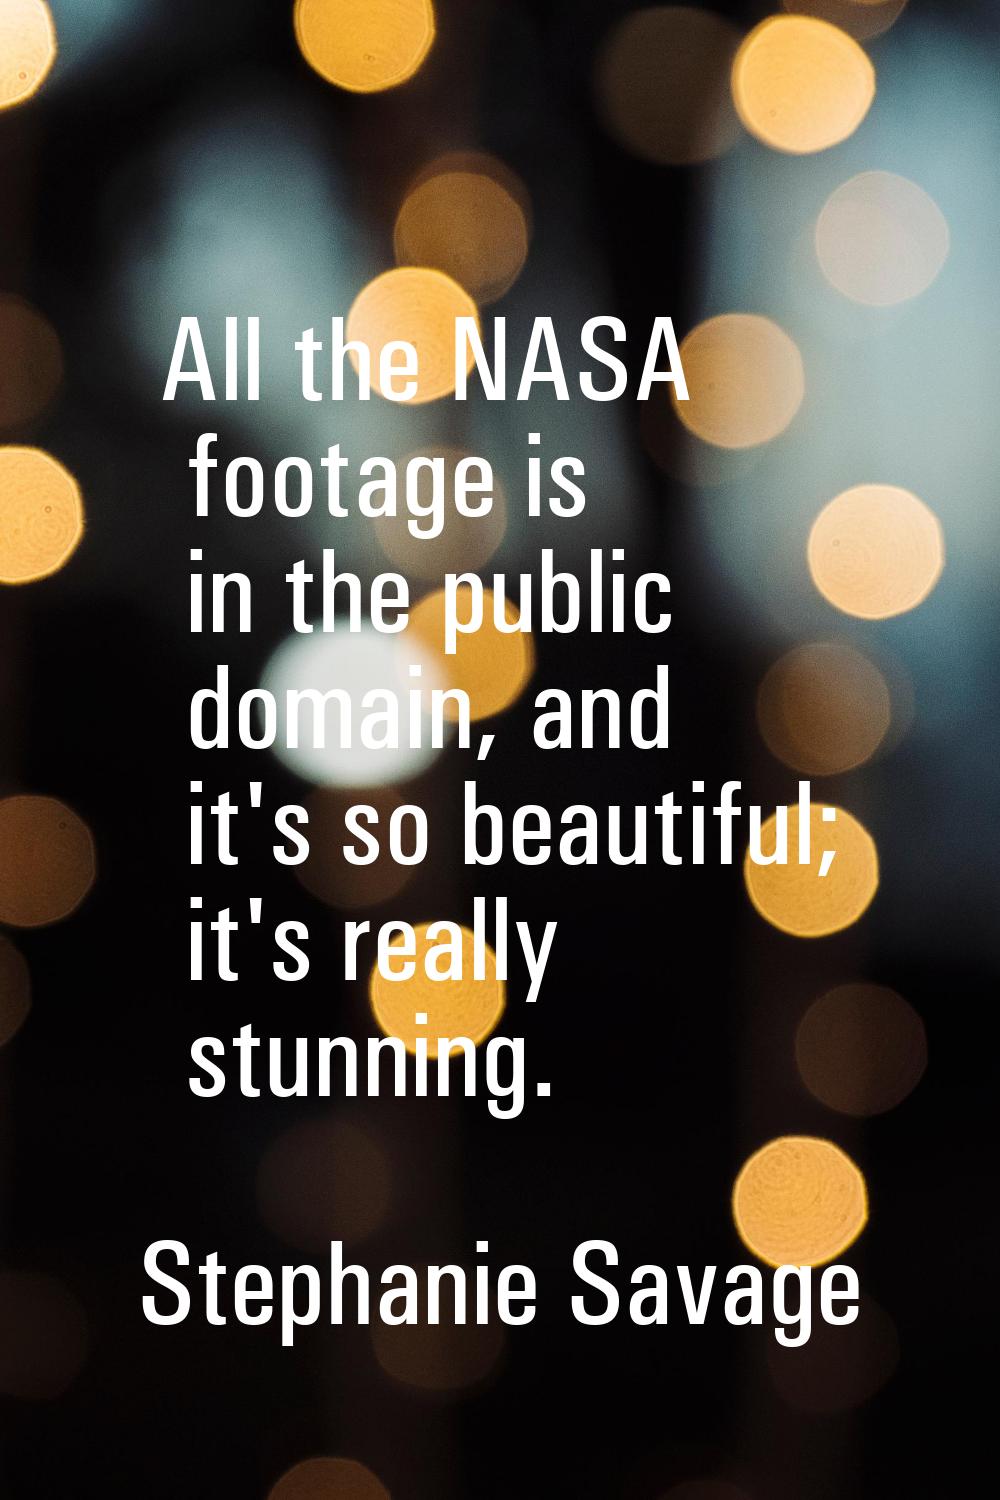 All the NASA footage is in the public domain, and it's so beautiful; it's really stunning.